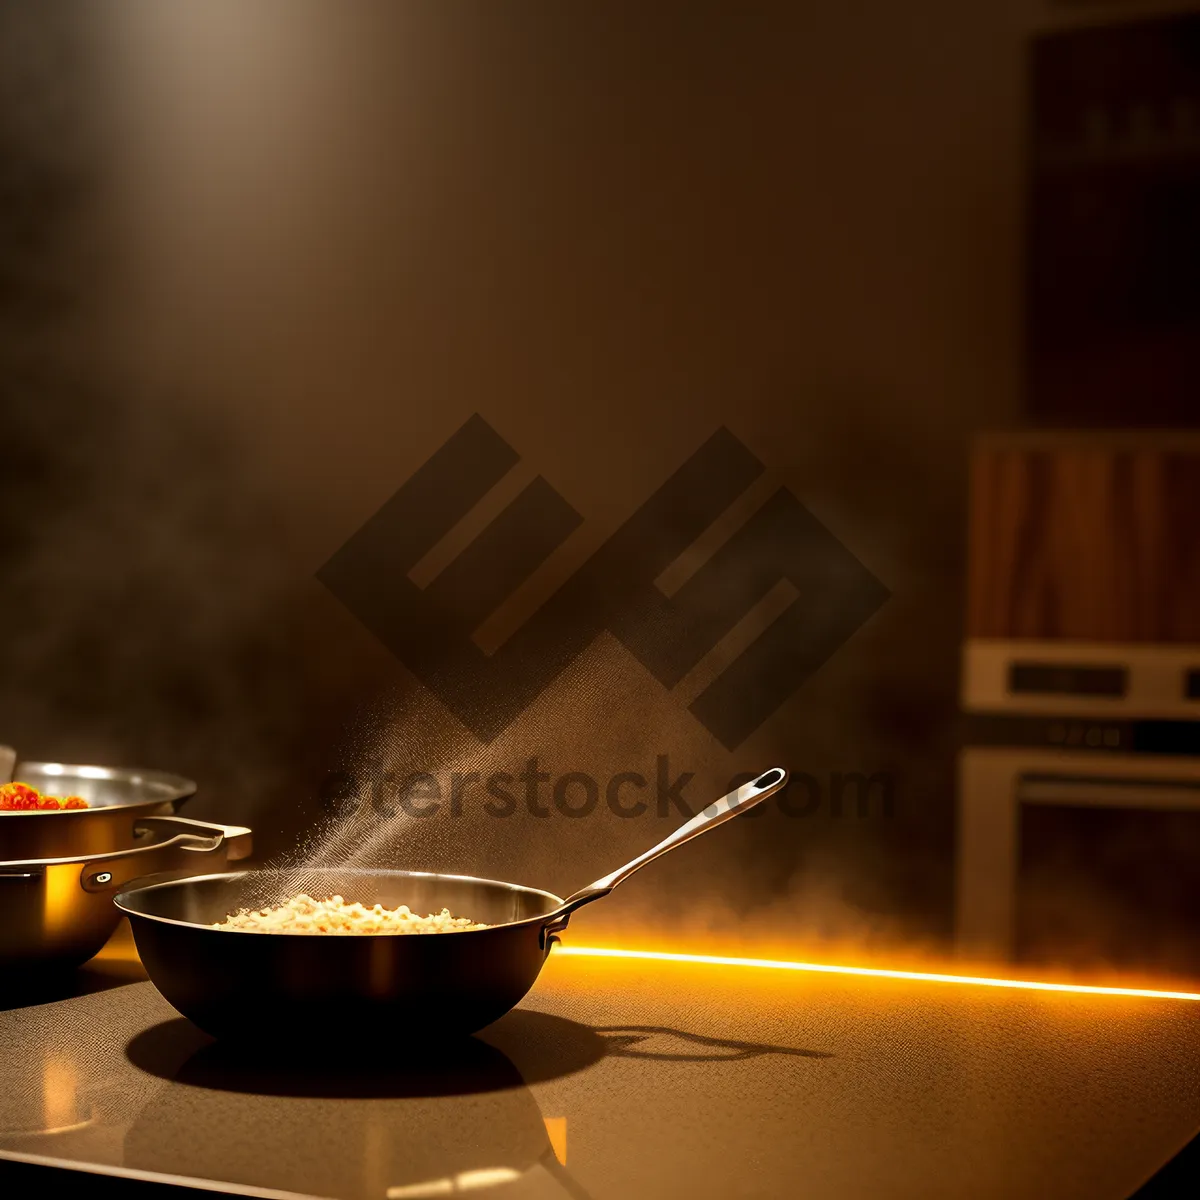 Picture of Hot Wok Ladle - Cooking Utensil for Delicious Meals